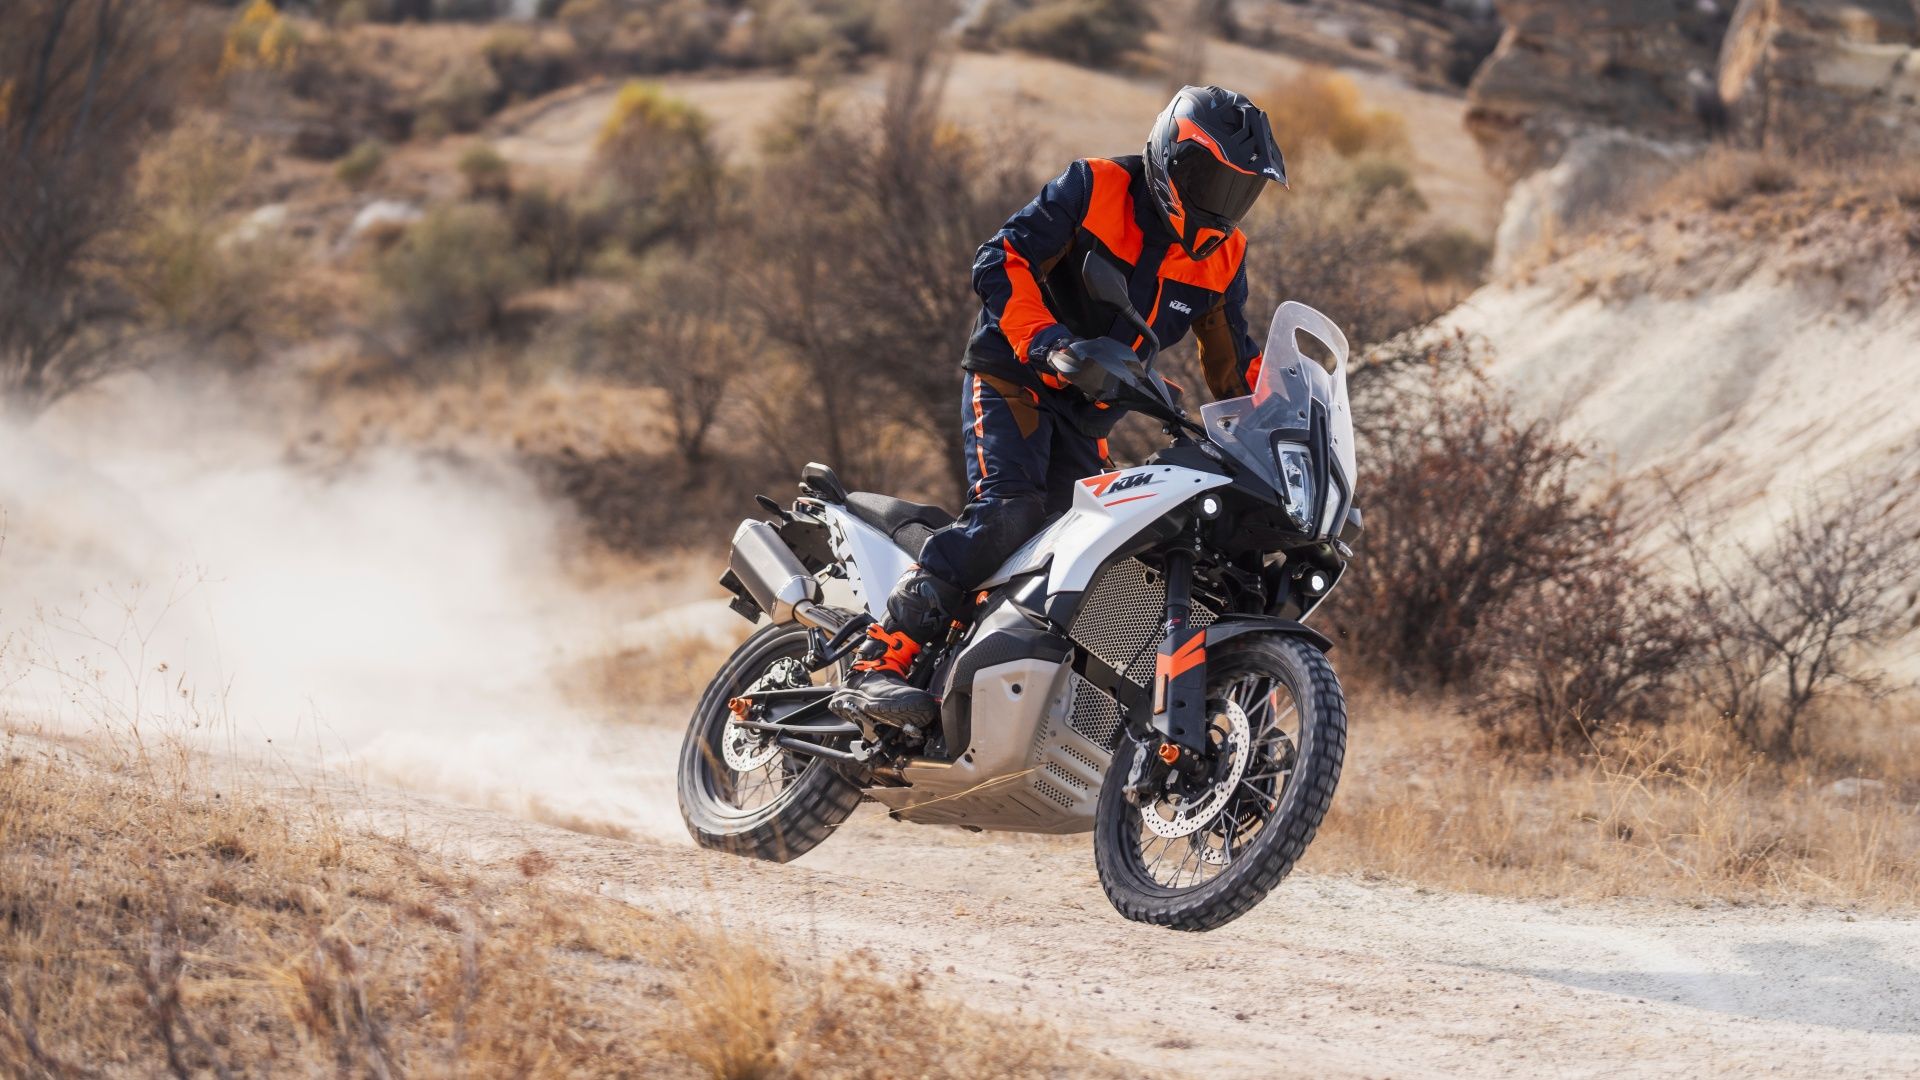 An action shot of the 2023 KTM 790 ADVENTURE riding on the dirt